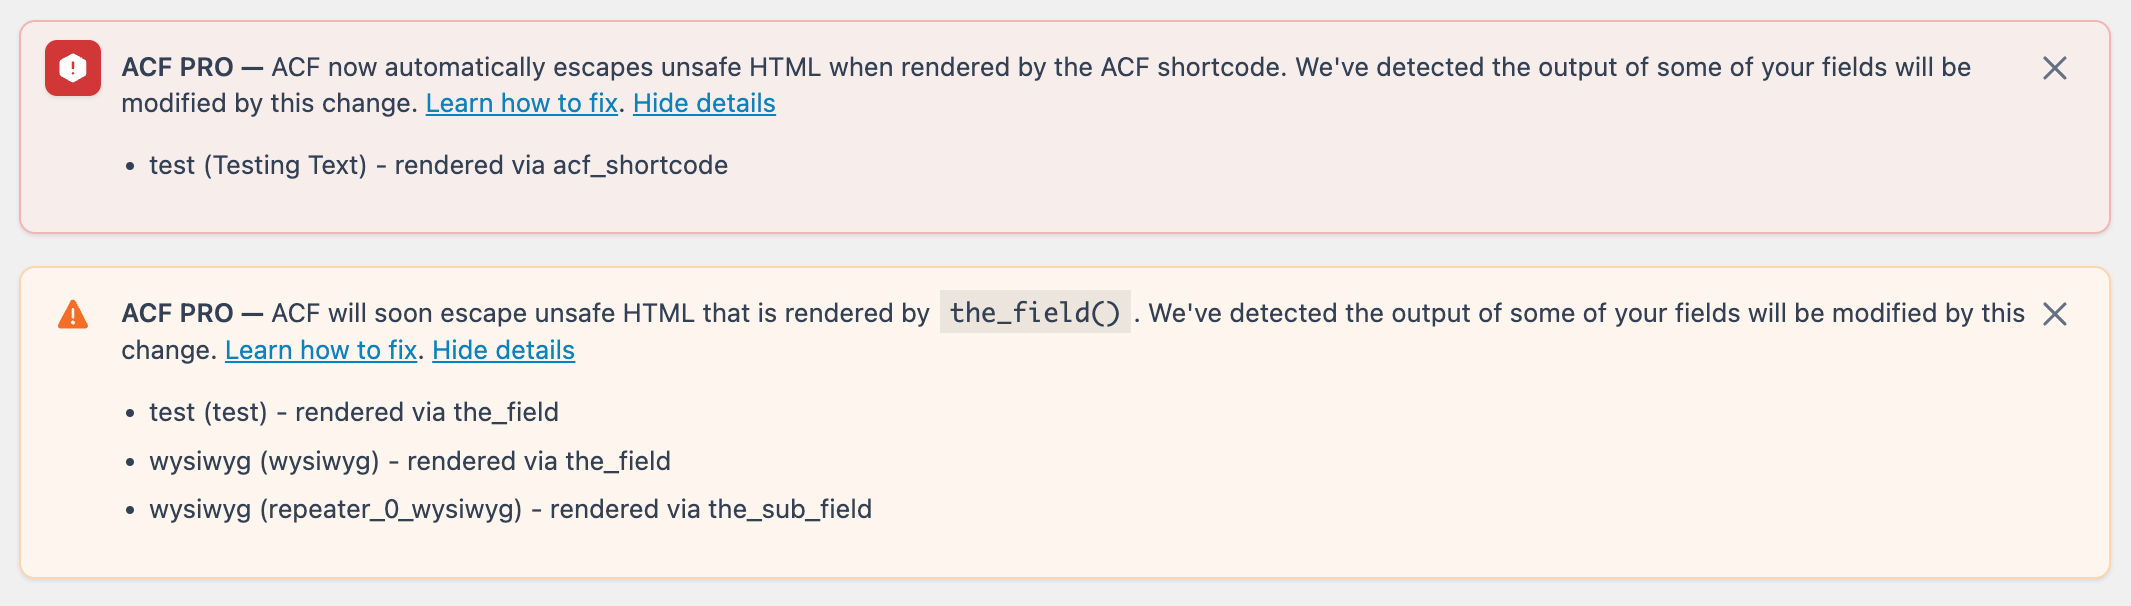 Example screenshots of ACF 6.2.5's admin messages warning about changes to field value escaping